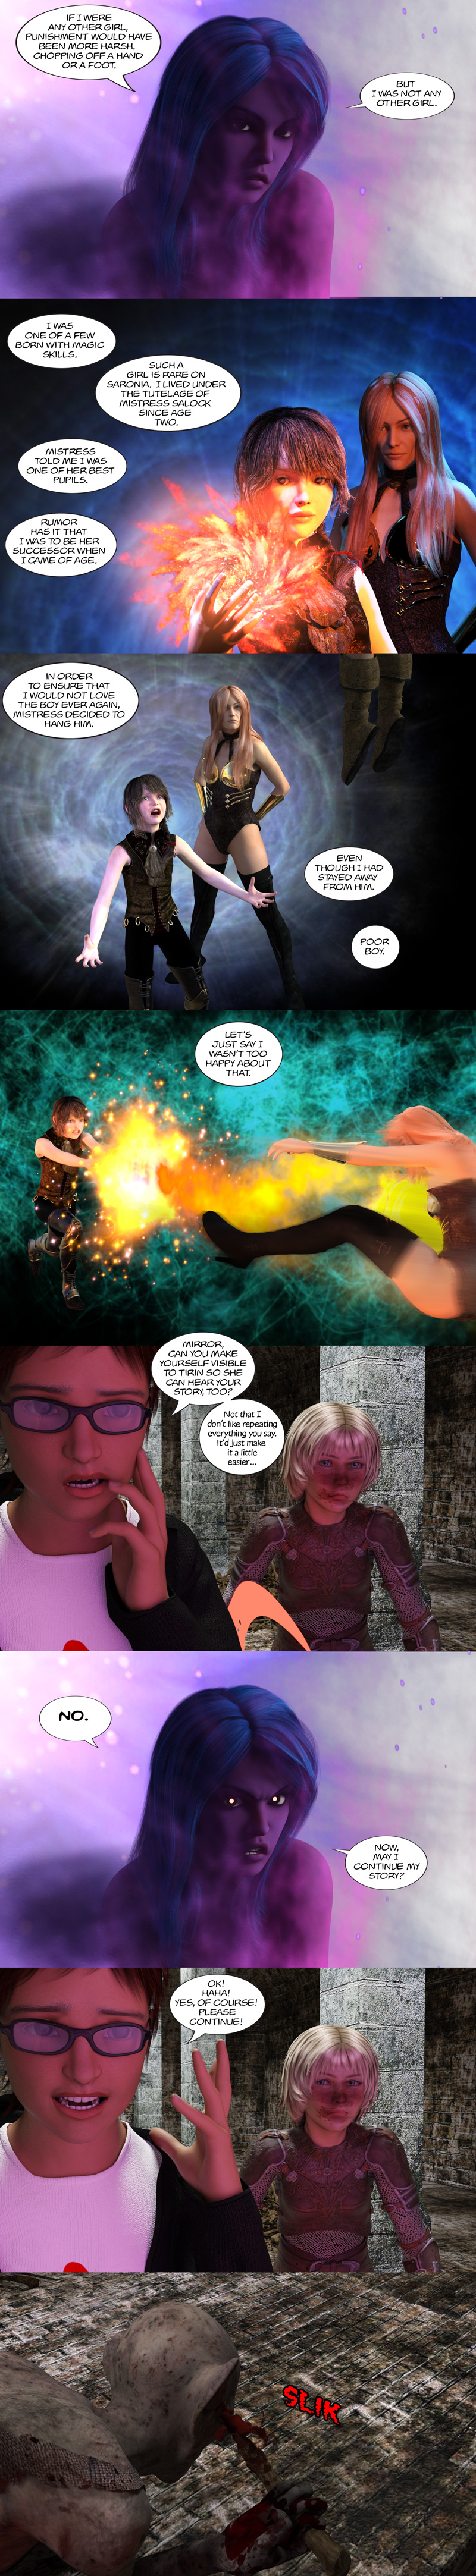 Chapter 12, page 31 – Mirror’s story and Radiwhill’s “slik”